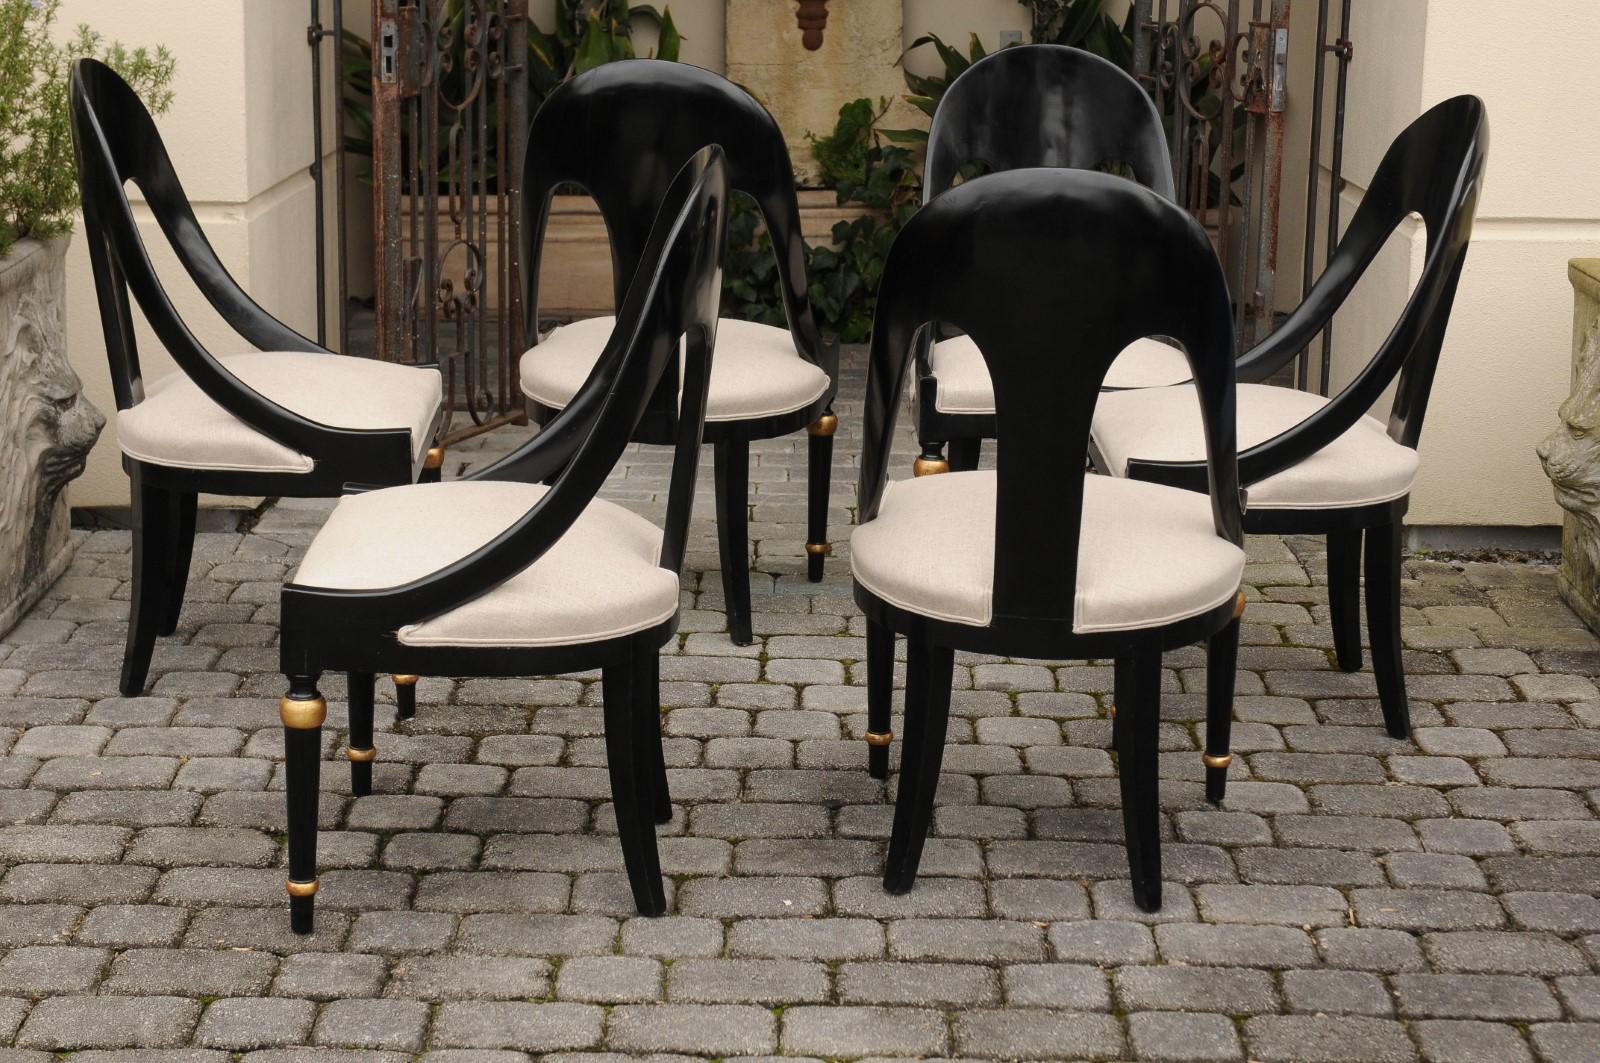 Upholstery Set of Six Vintage Ebonized Wood Upholstered Spoon Back Chairs with Gilt Accents